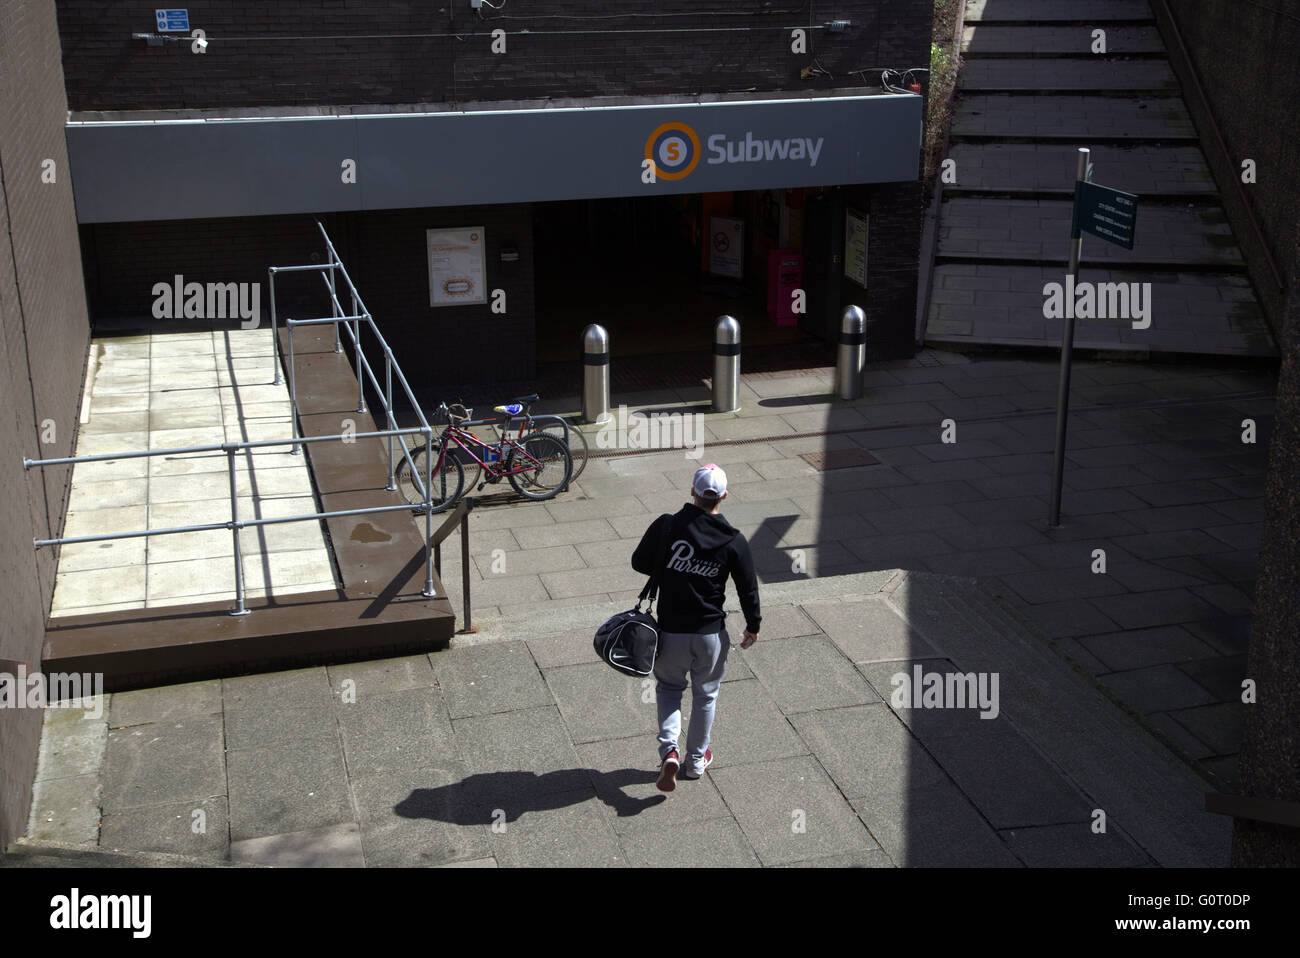 George Cross Subway entrance with young person entering, Glasgow U.K Stock Photo